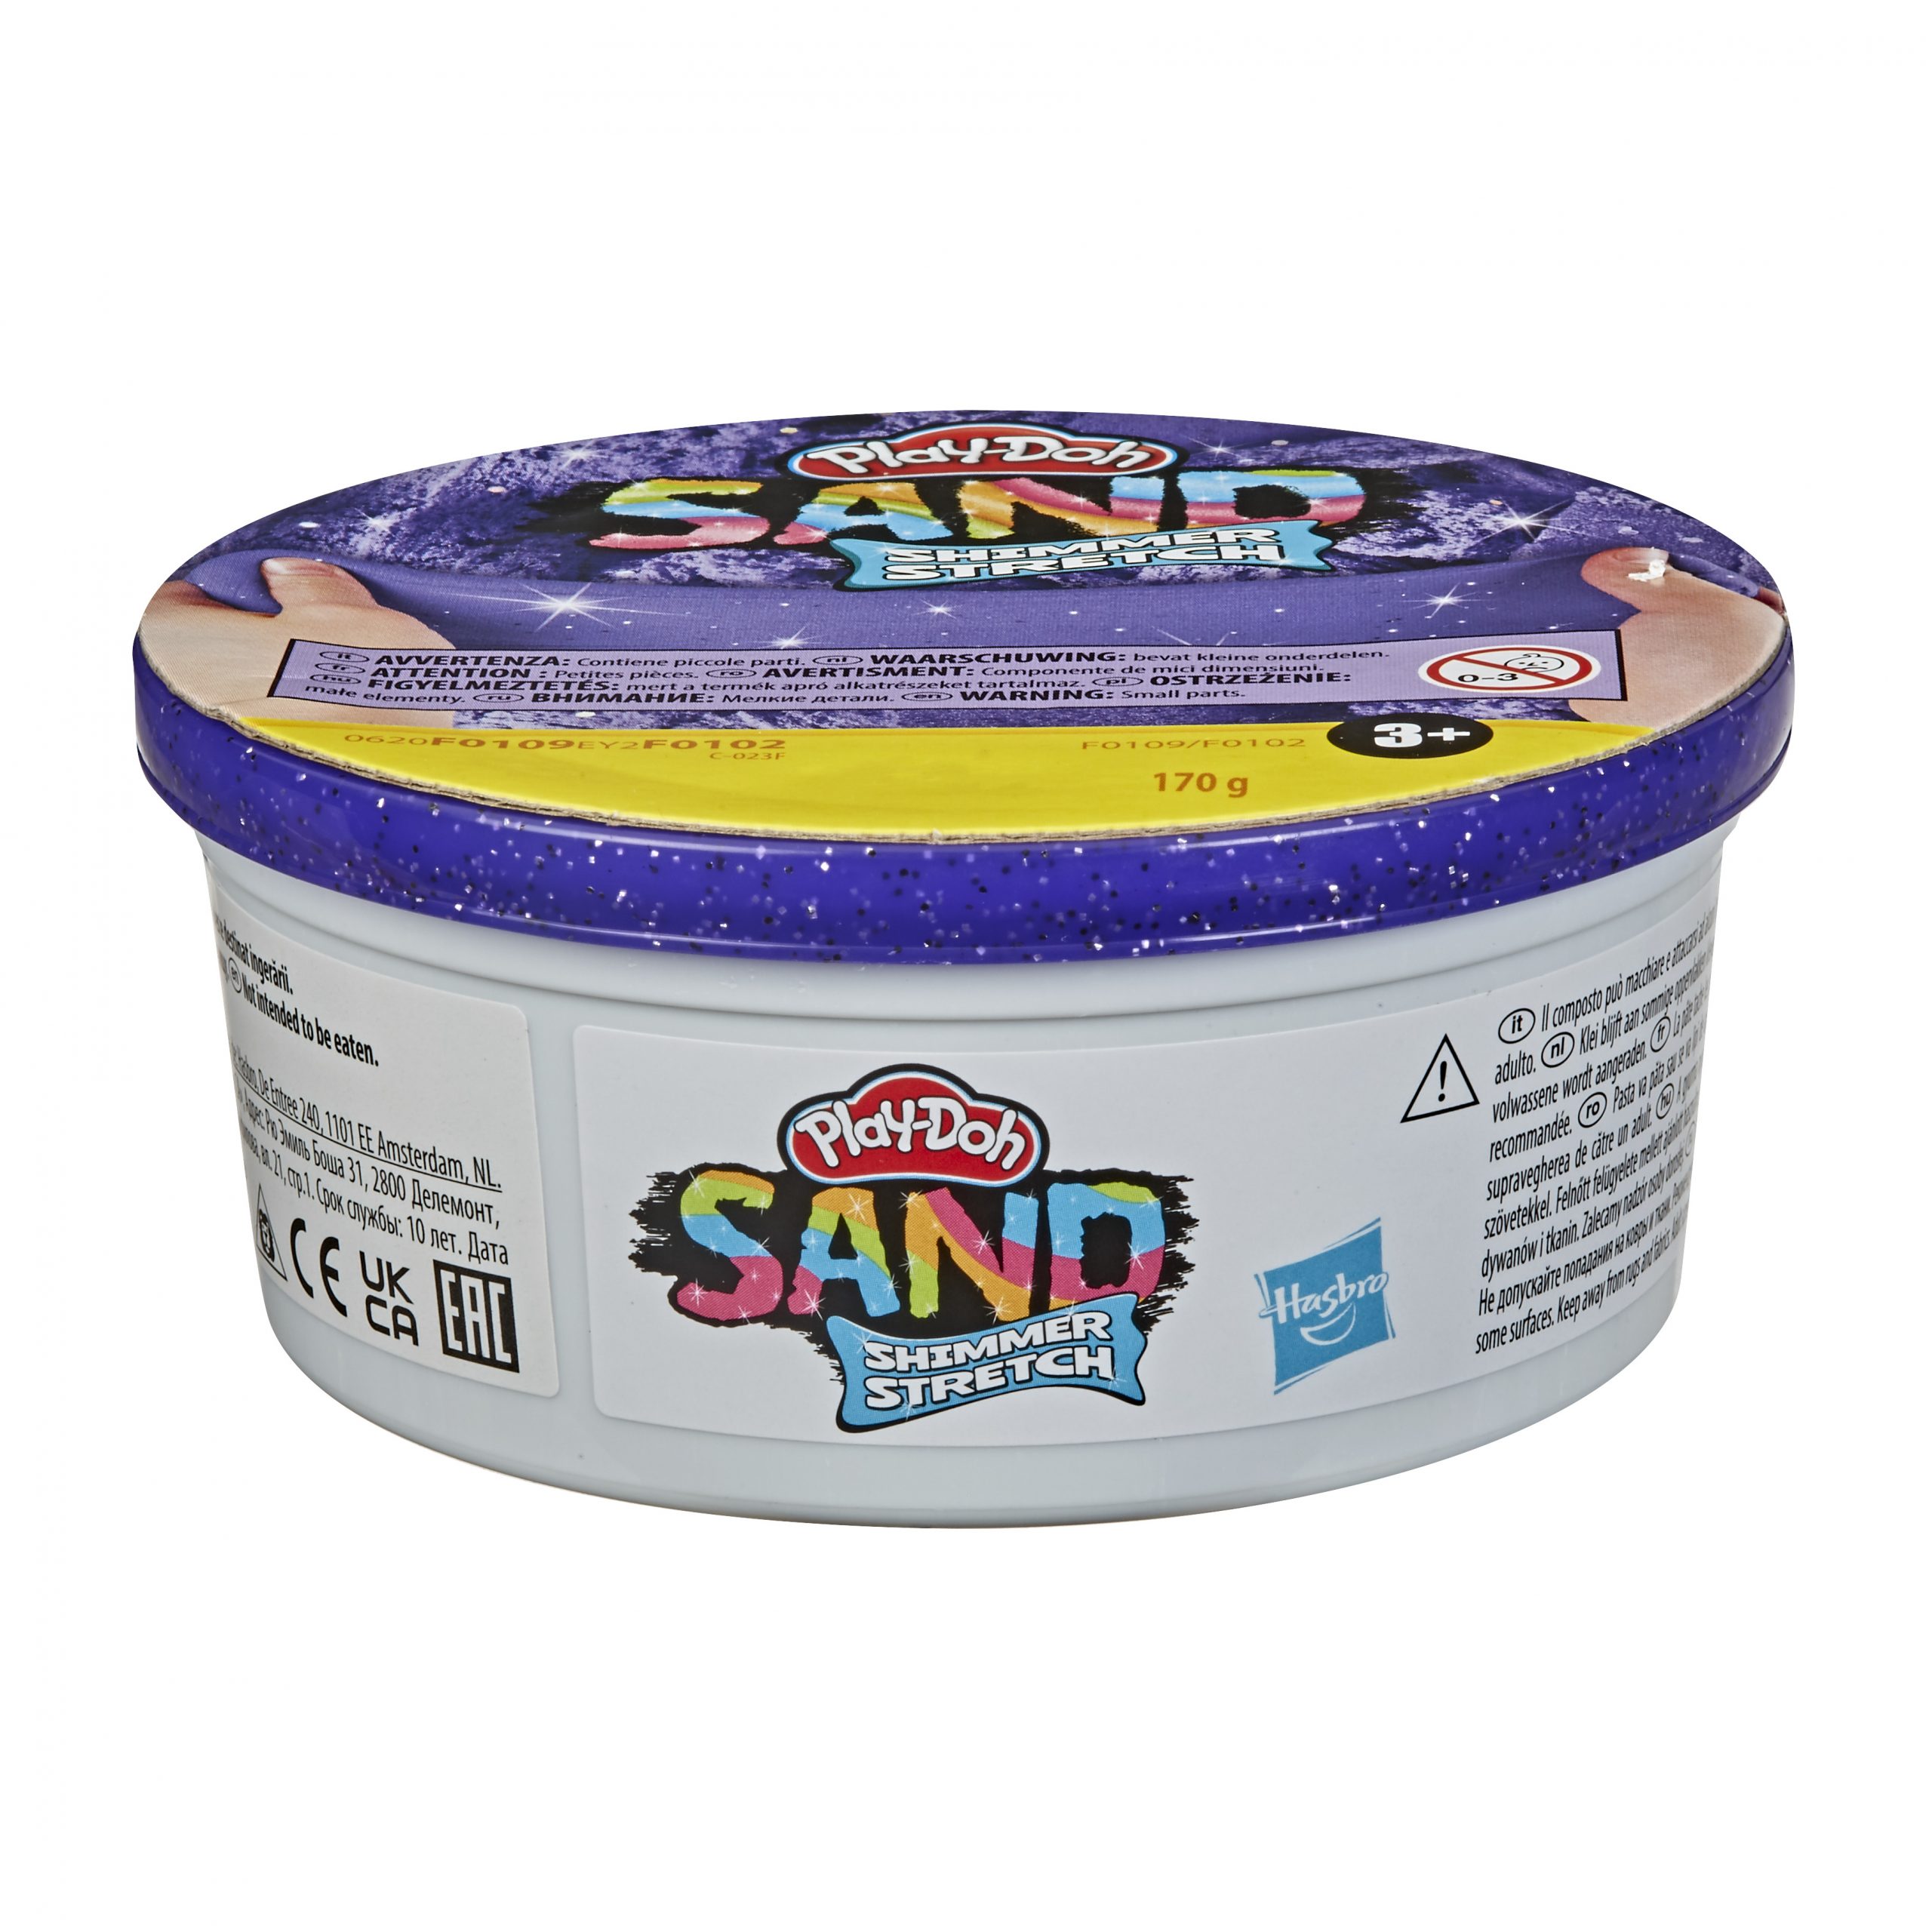  Play-doh Sand Shimmer Stretch Single Can Of Sparkly Cyan Blue Compound Σιέλ F0102 F0102 - Play-Doh